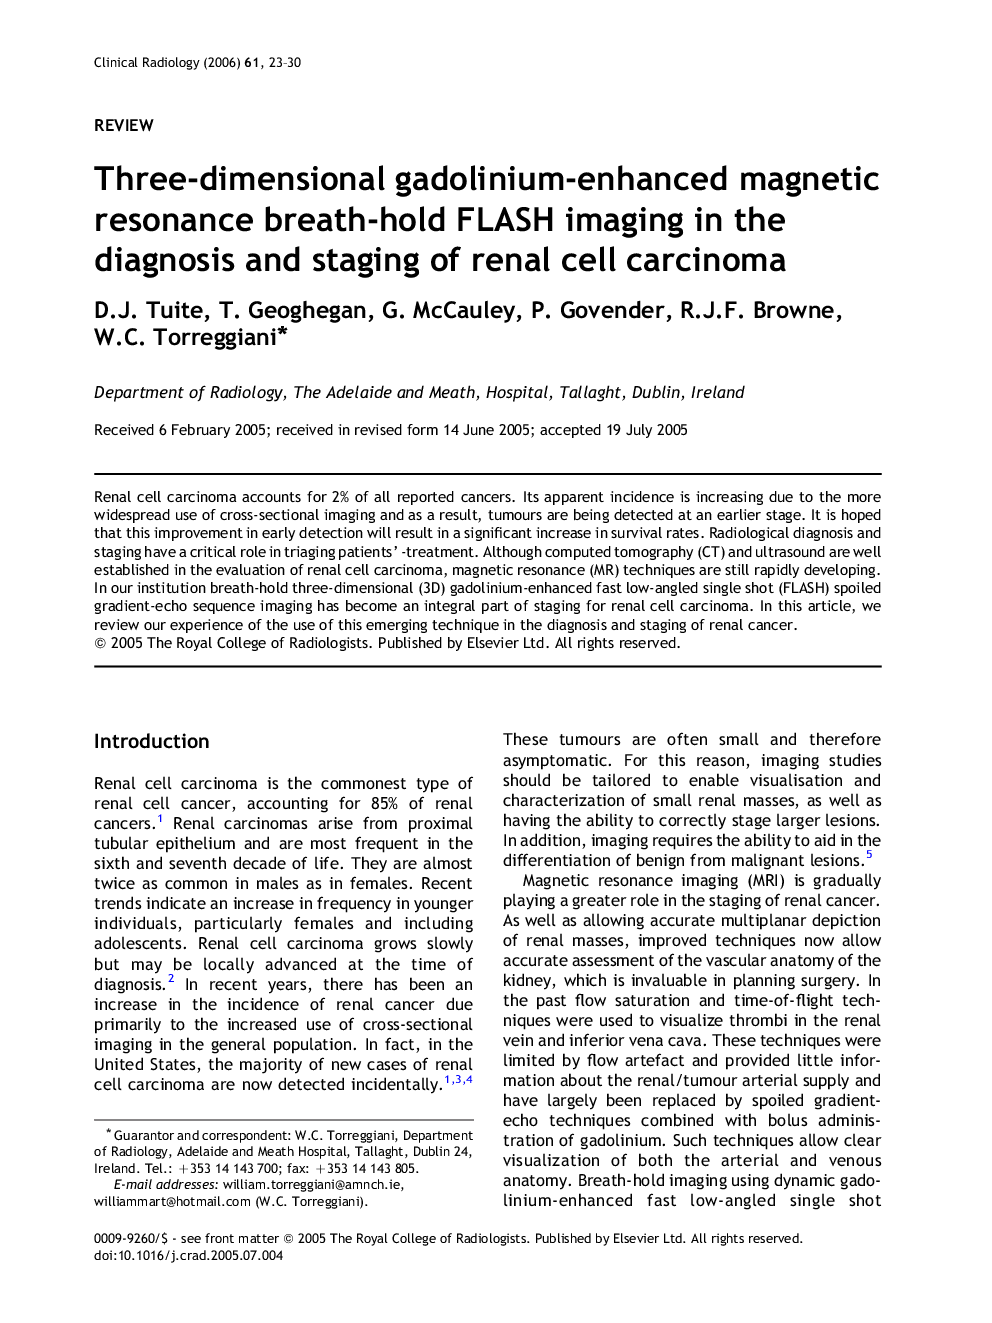 Three-dimensional gadolinium-enhanced magnetic resonance breath-hold FLASH imaging in the diagnosis and staging of renal cell carcinoma